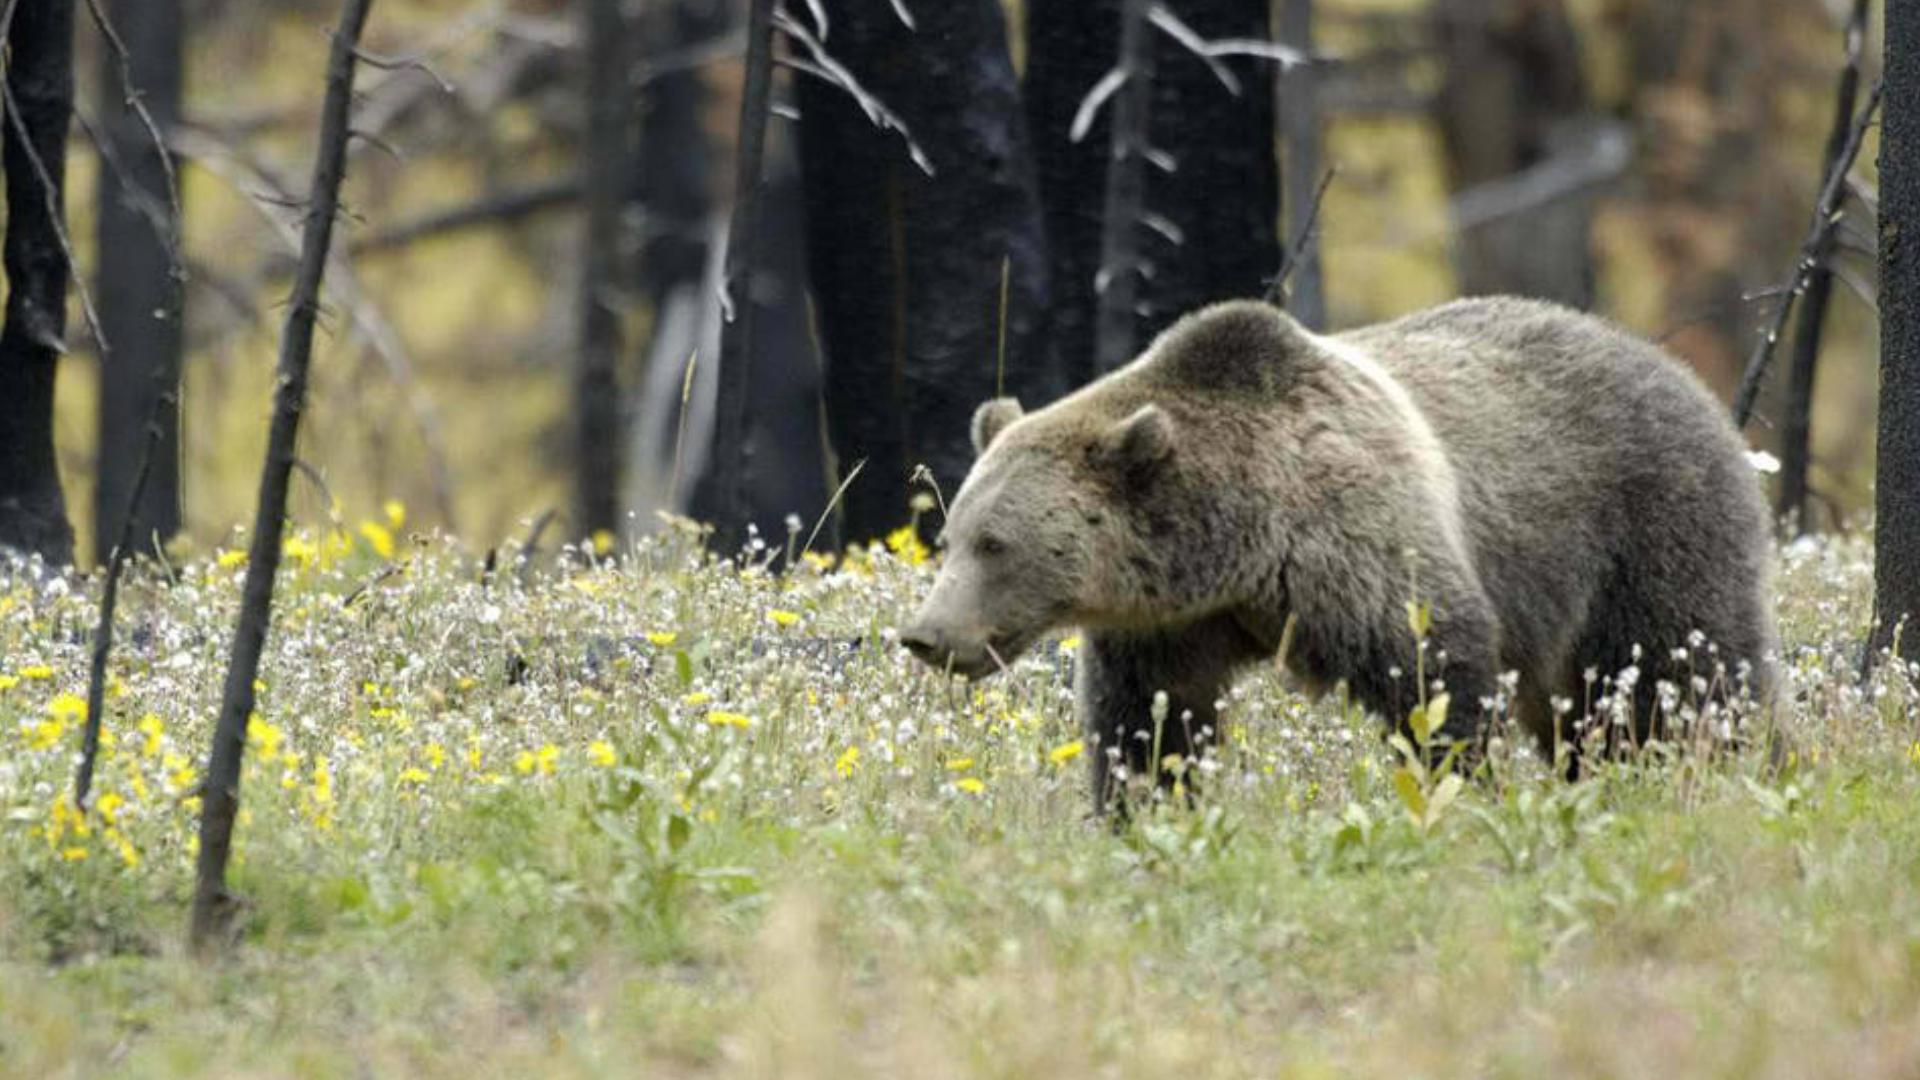 Idaho Fish and Game said grizzlies are not often seen in the North Fork Salmon River area.